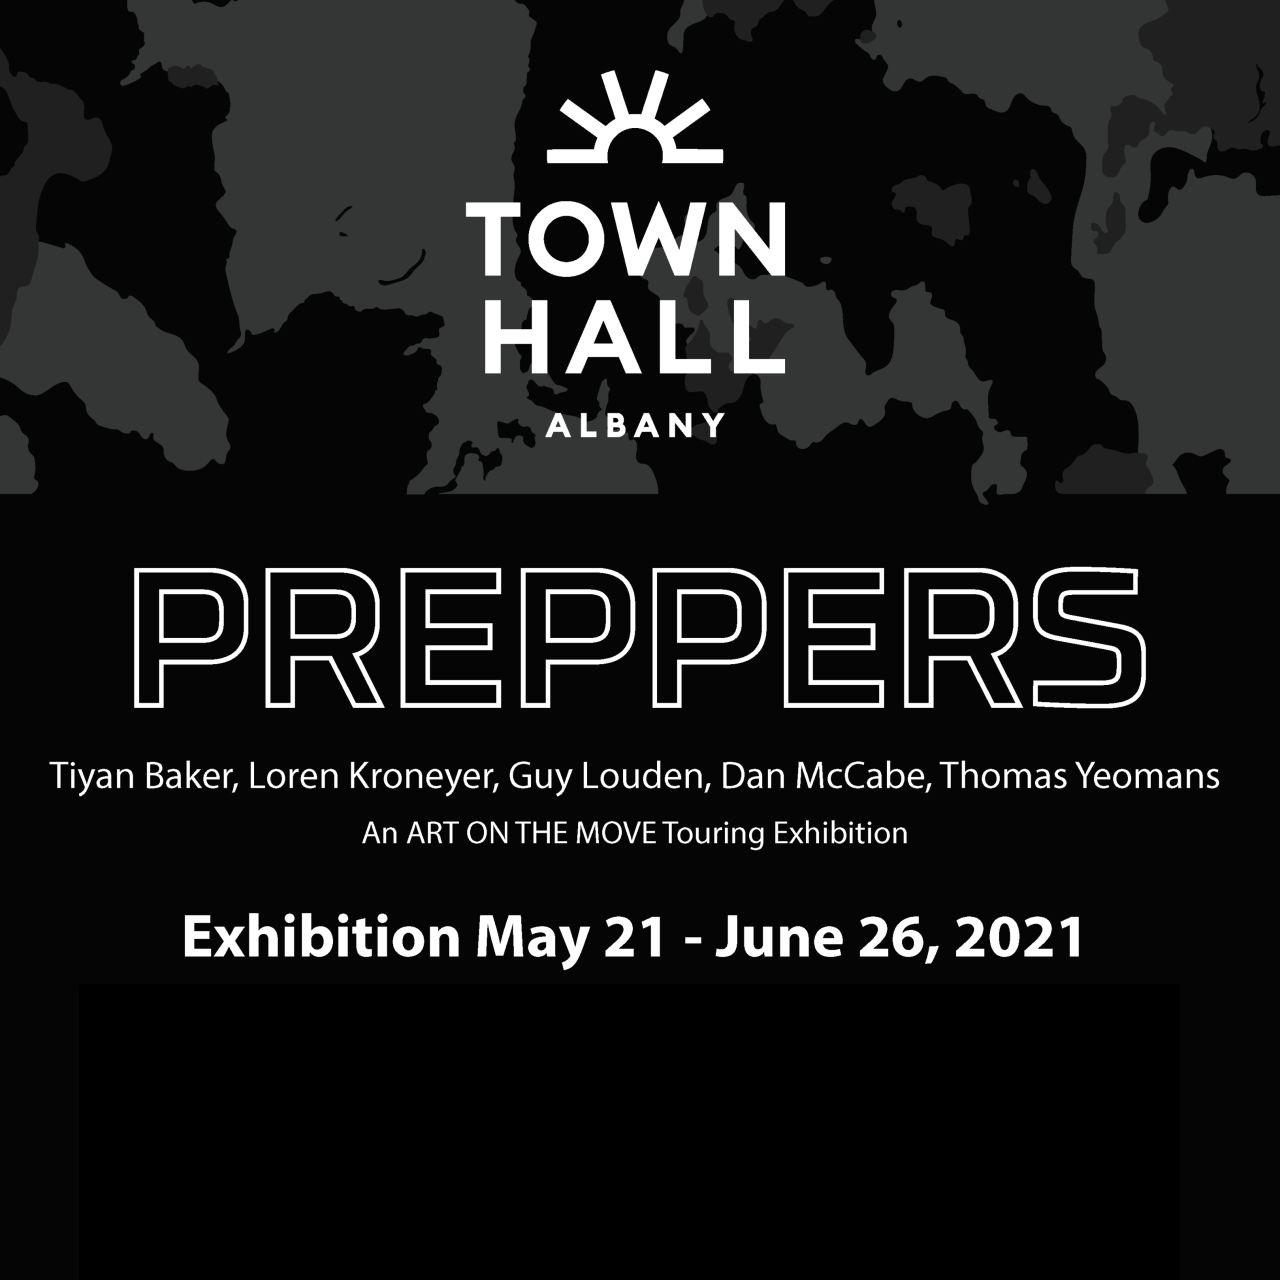 Preppers opens at the Town Hall